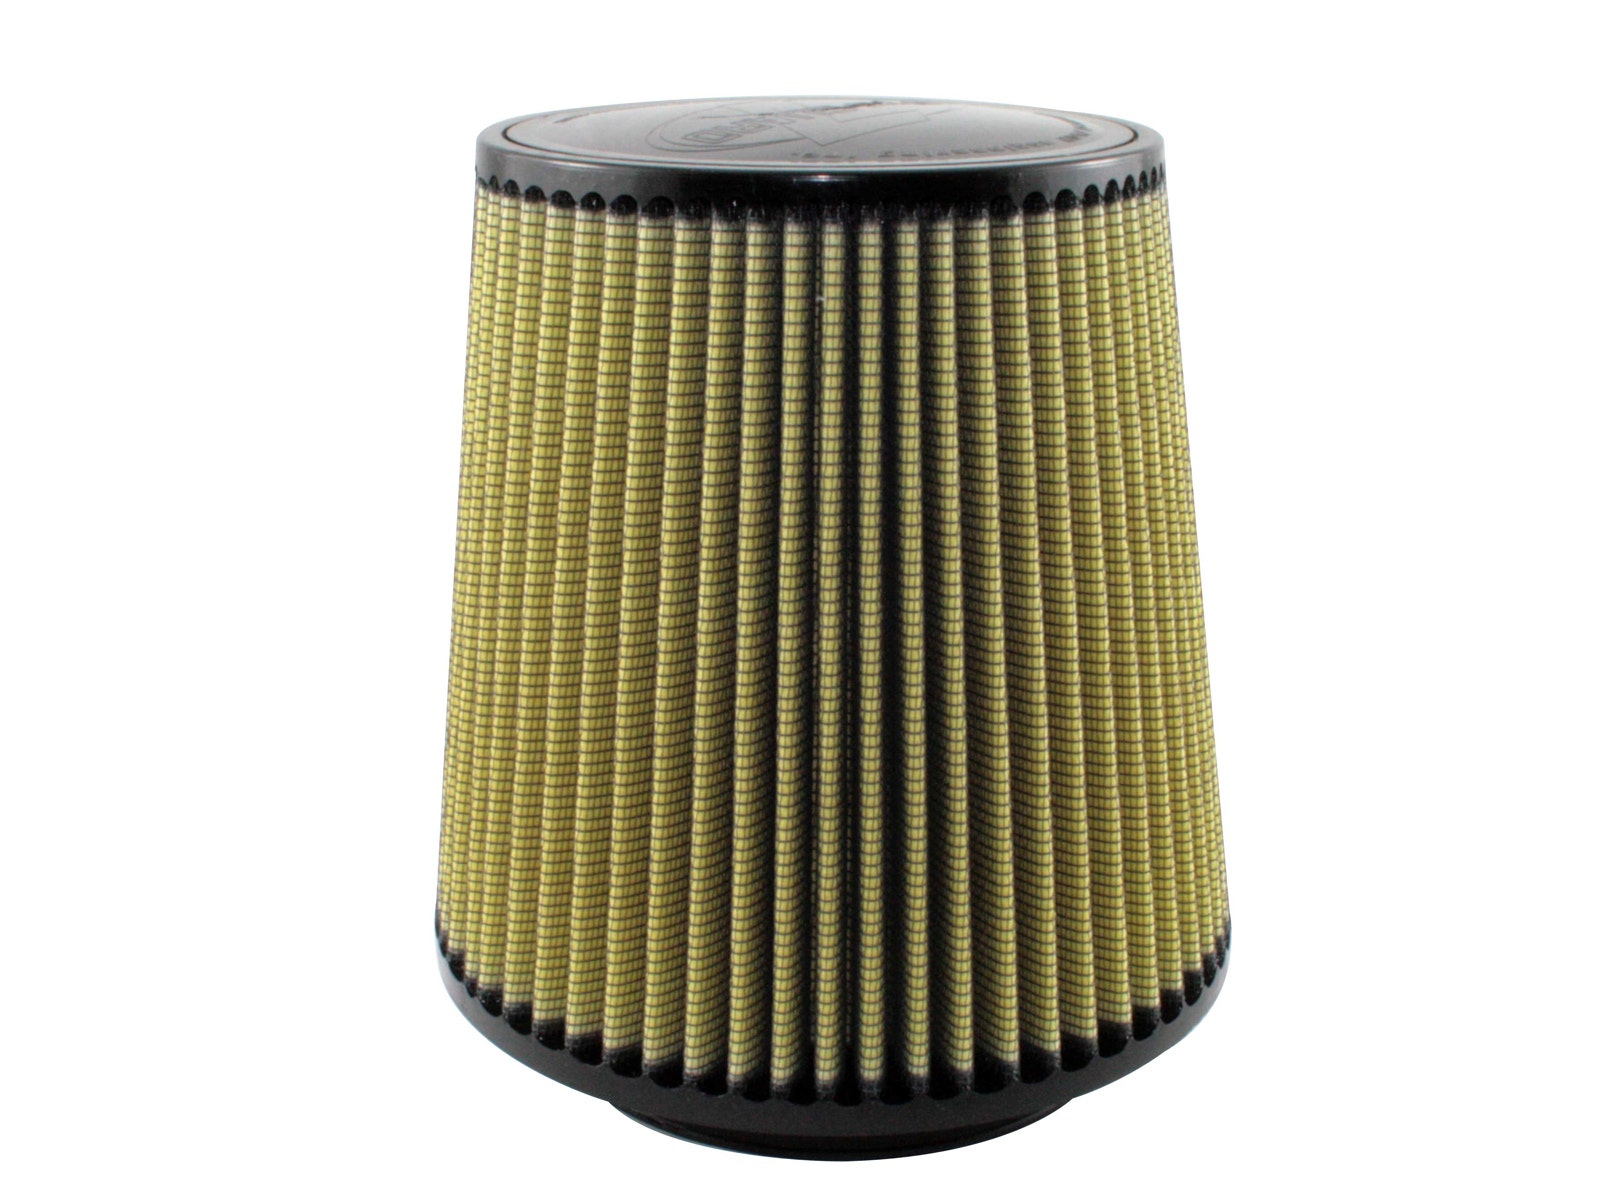 Magnum FORCE Intake Replacement Air Filter w/ Pro GUARD 7 Media 6 IN F x 9 IN B x 7 IN T x 9 IN H